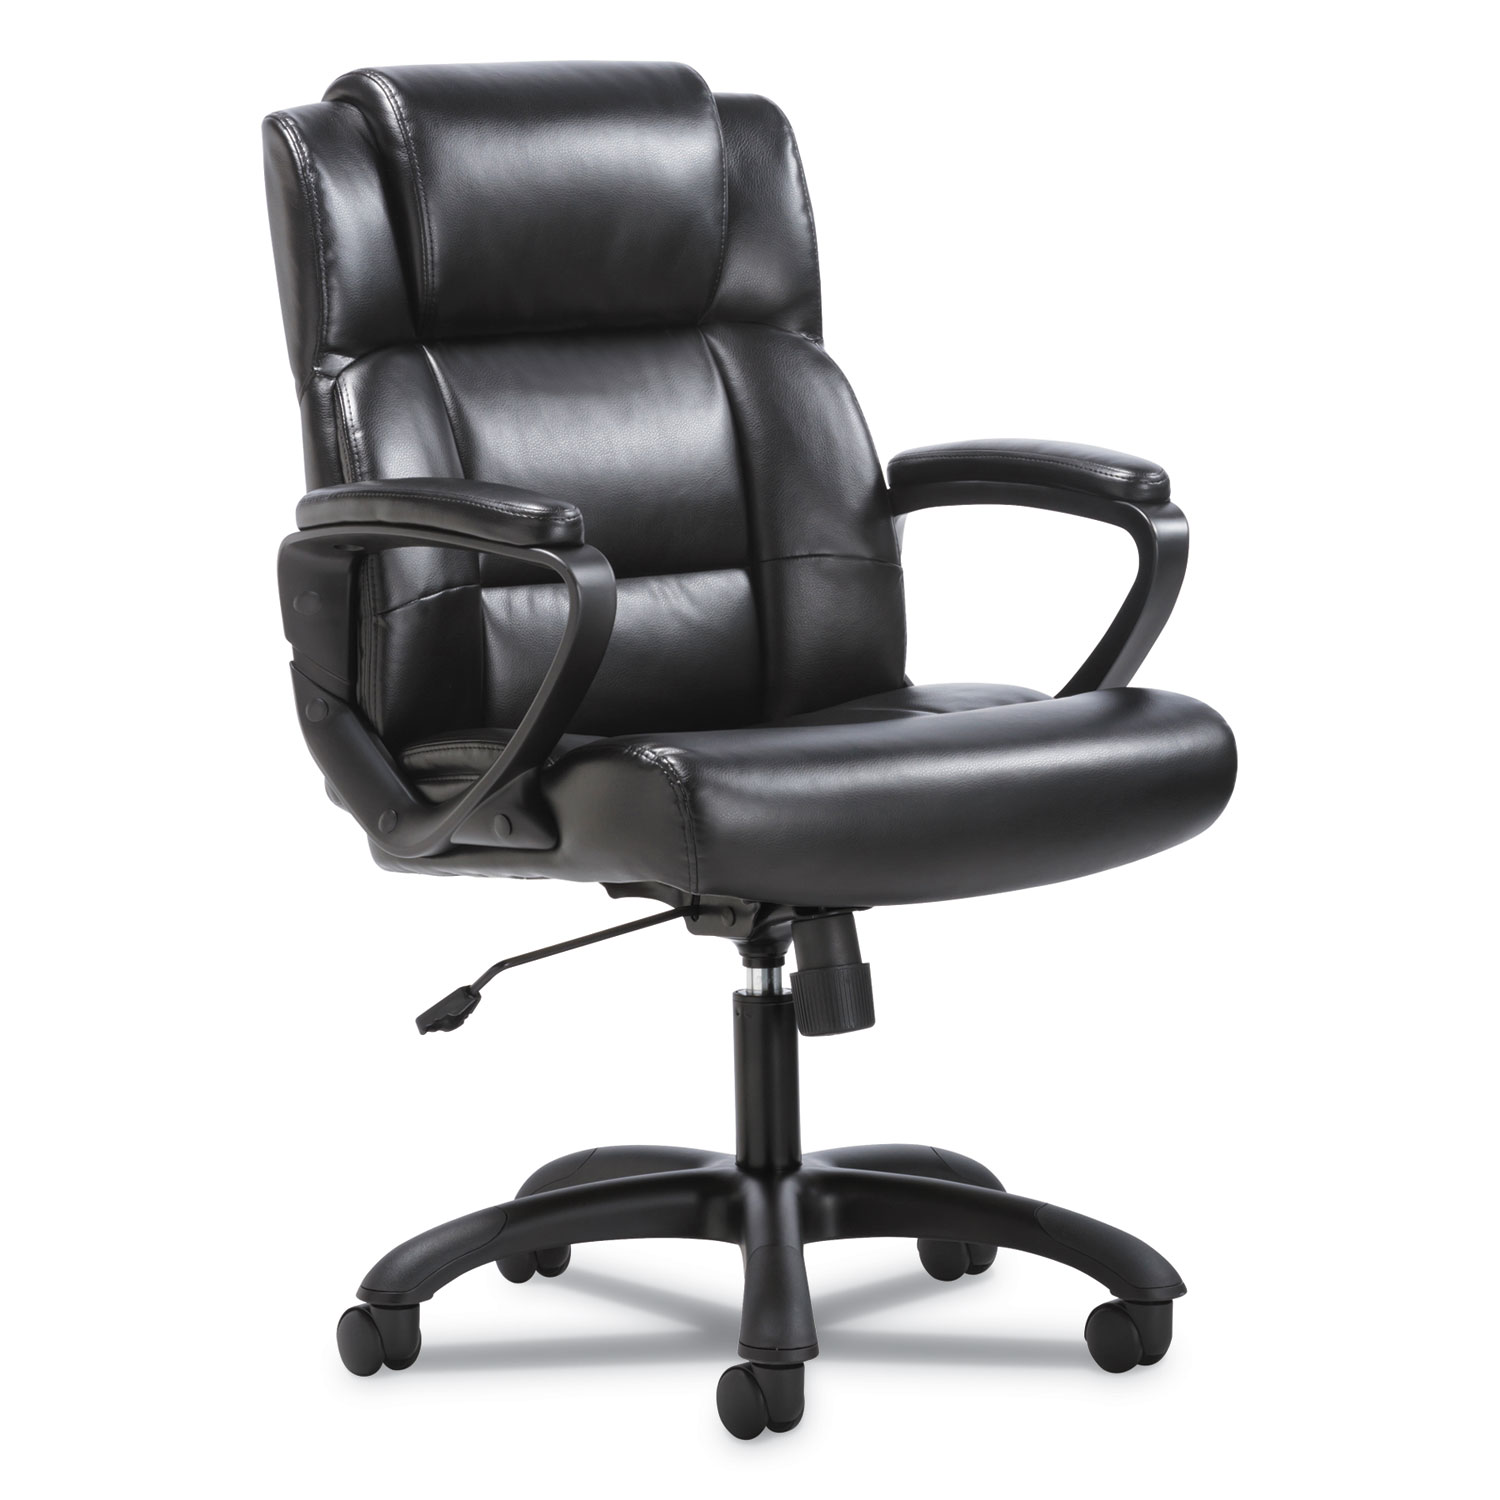 Mid-Back Executive Chair, Black Leather